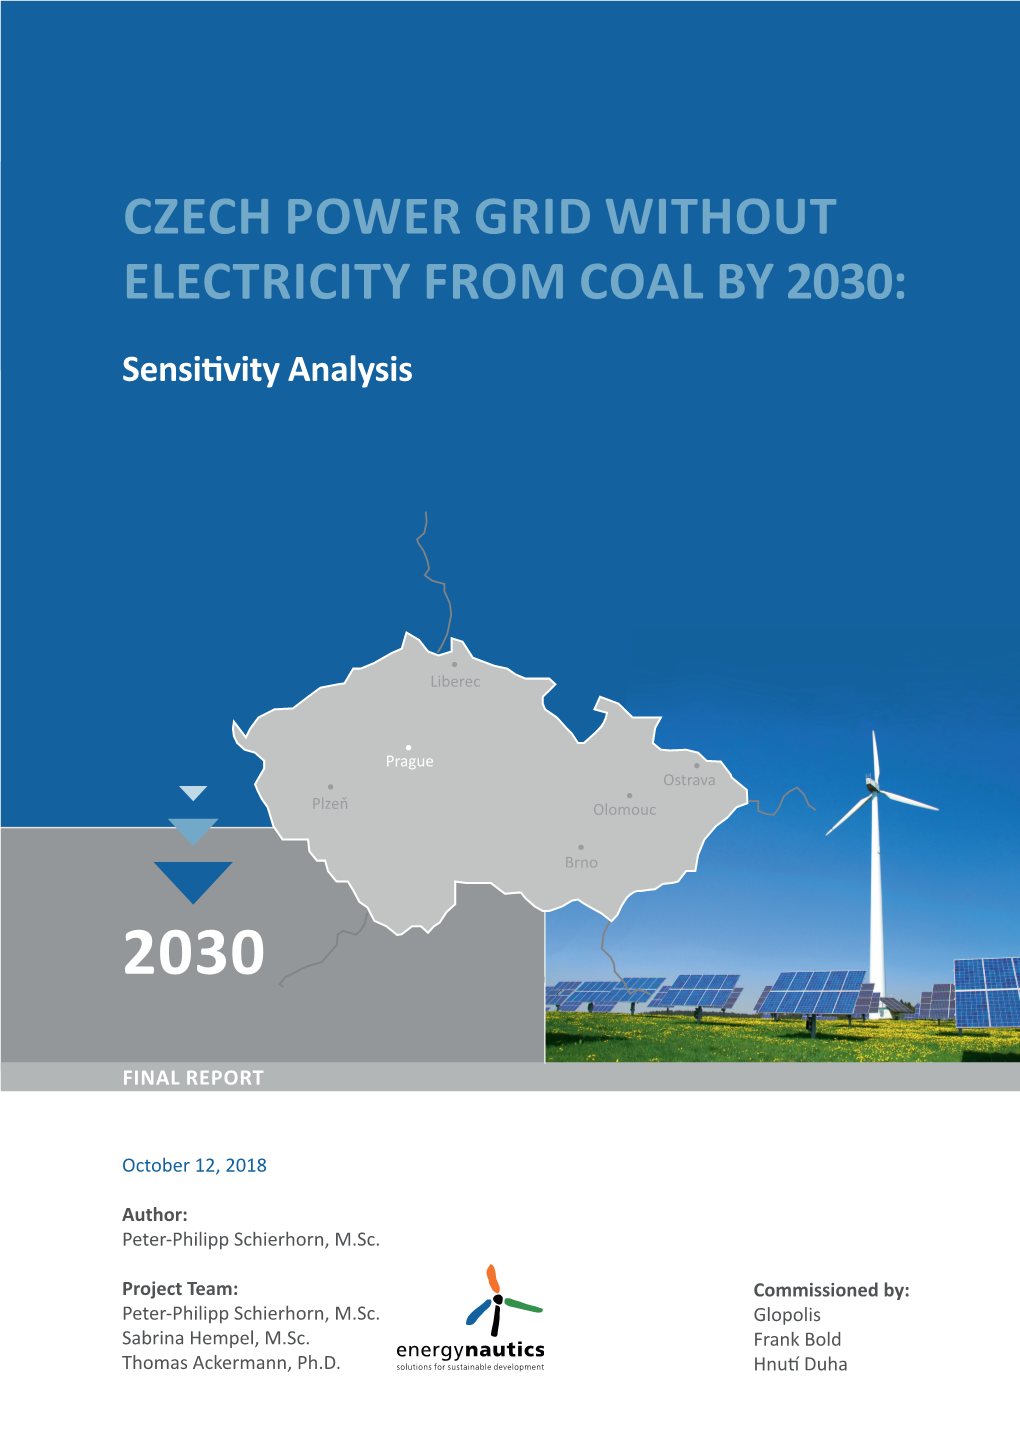 Czech Power Grid Without Electricity from Coal by 2030